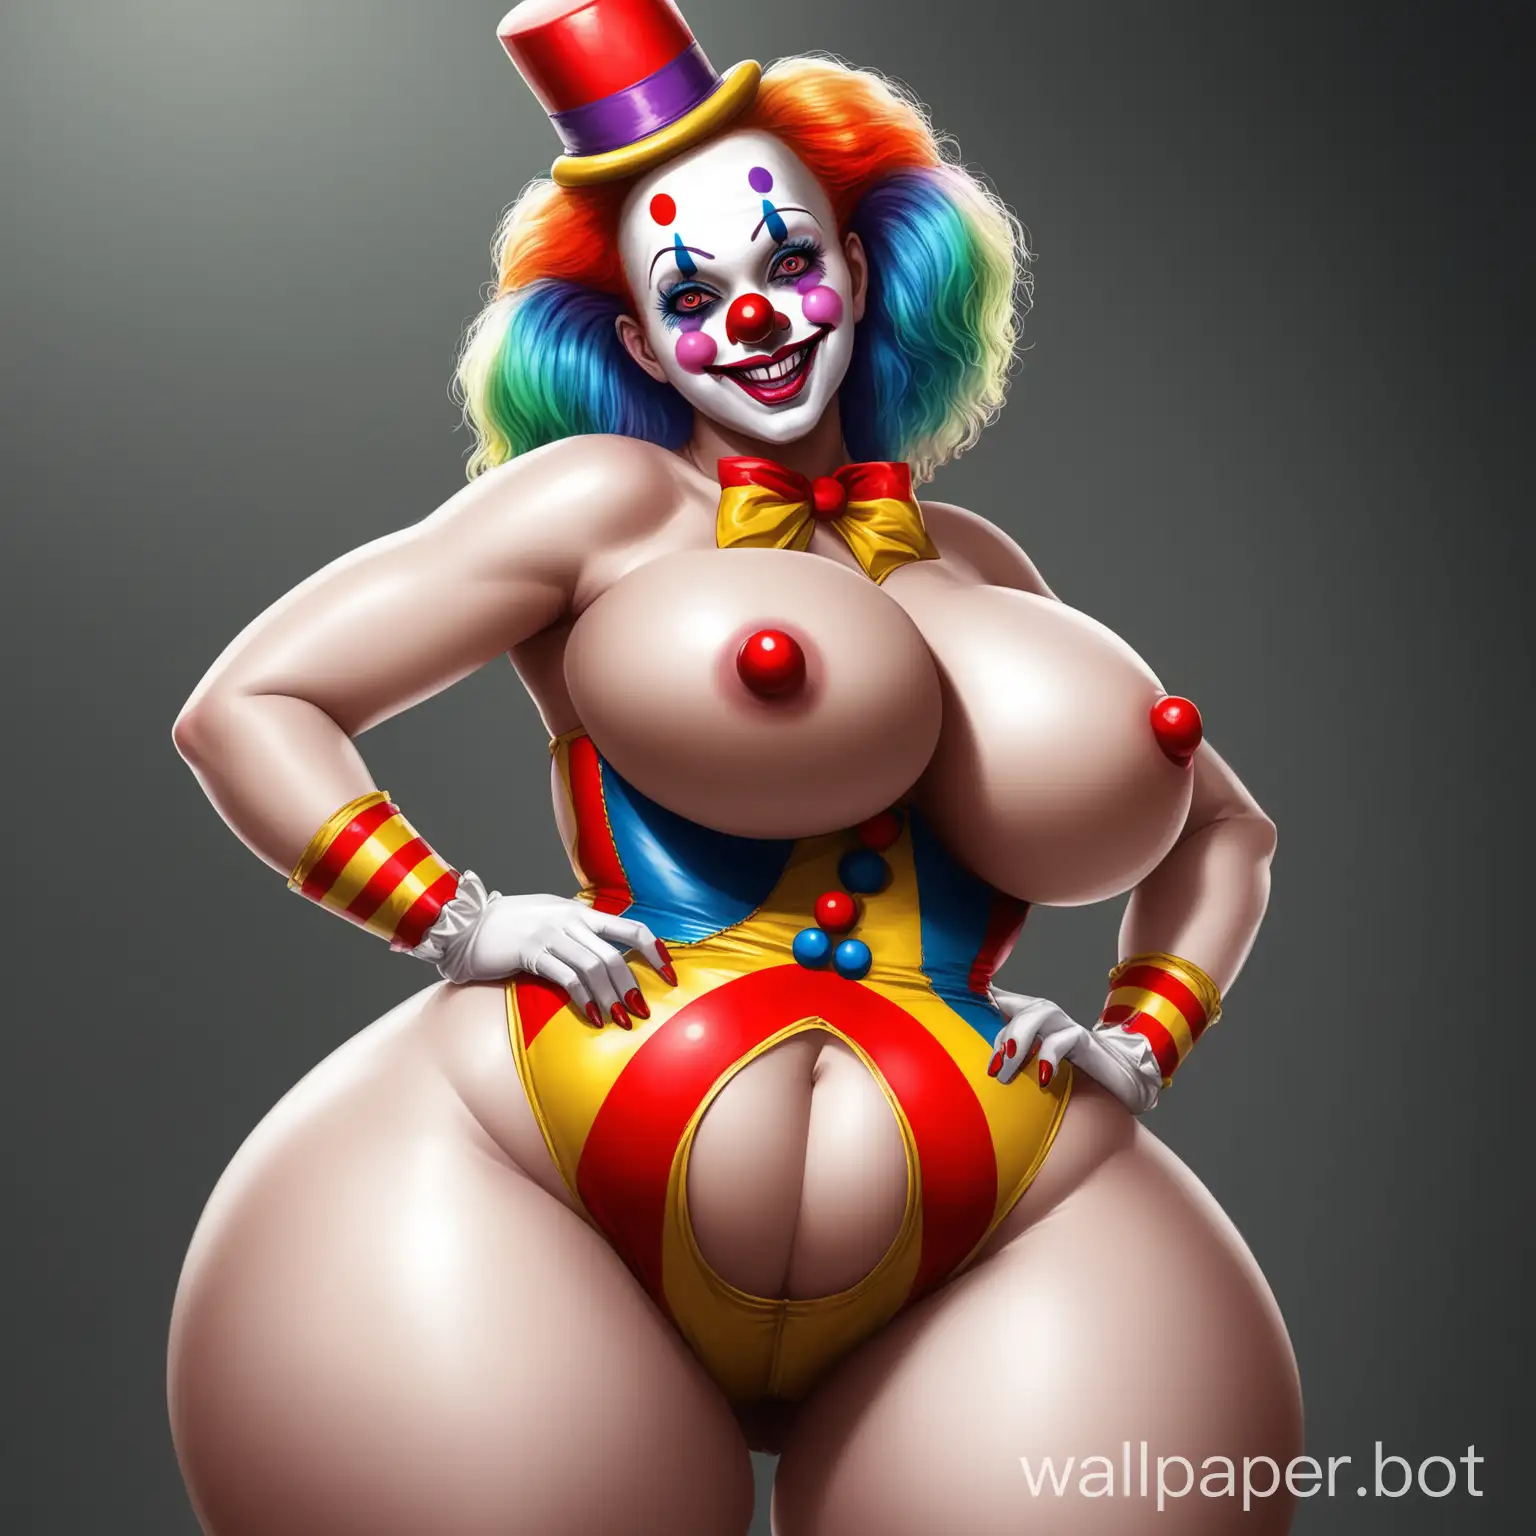 Sensual-Clown-Woman-with-Voluptuous-Hips-Embracing-Her-Curves